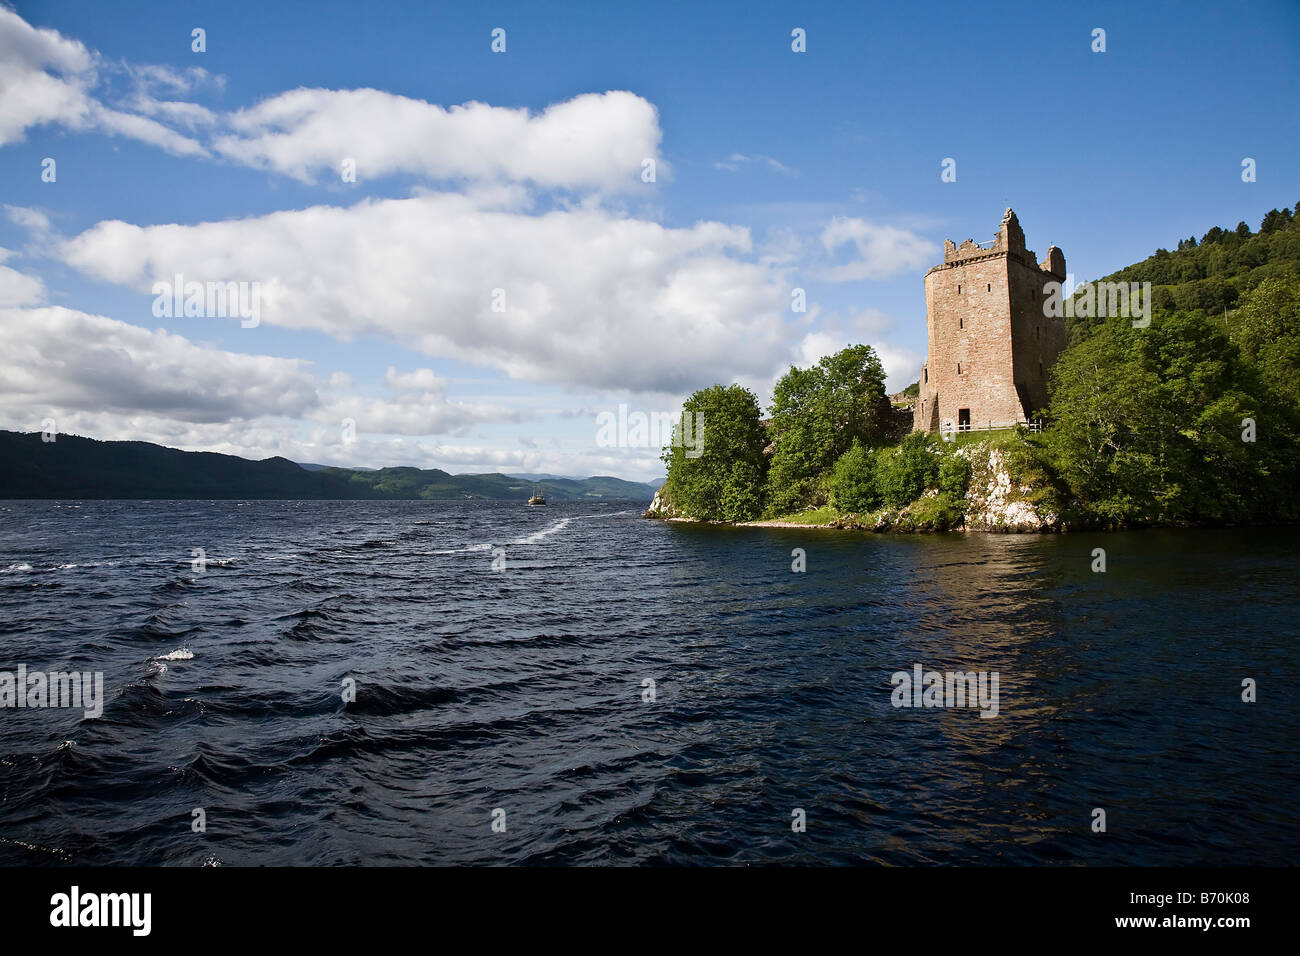 Urquhart Castle, on the shores of Loch Ness, Scotland Stock Photo